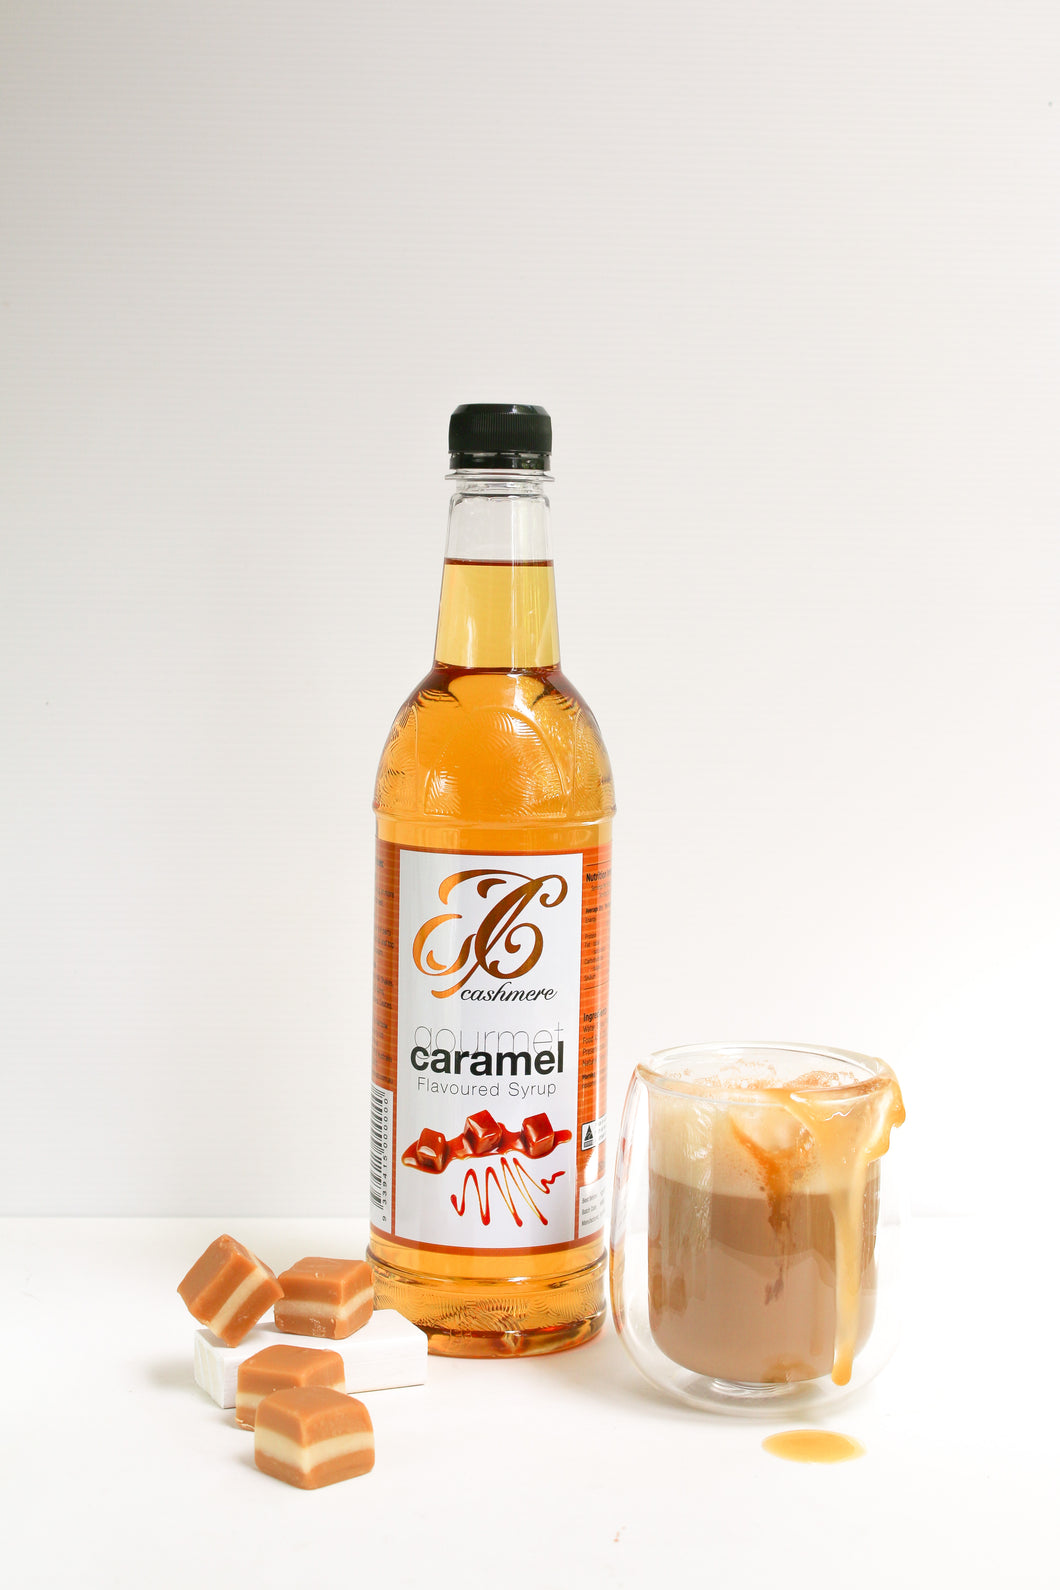 Cashmere Caramel Flavoured Syrup